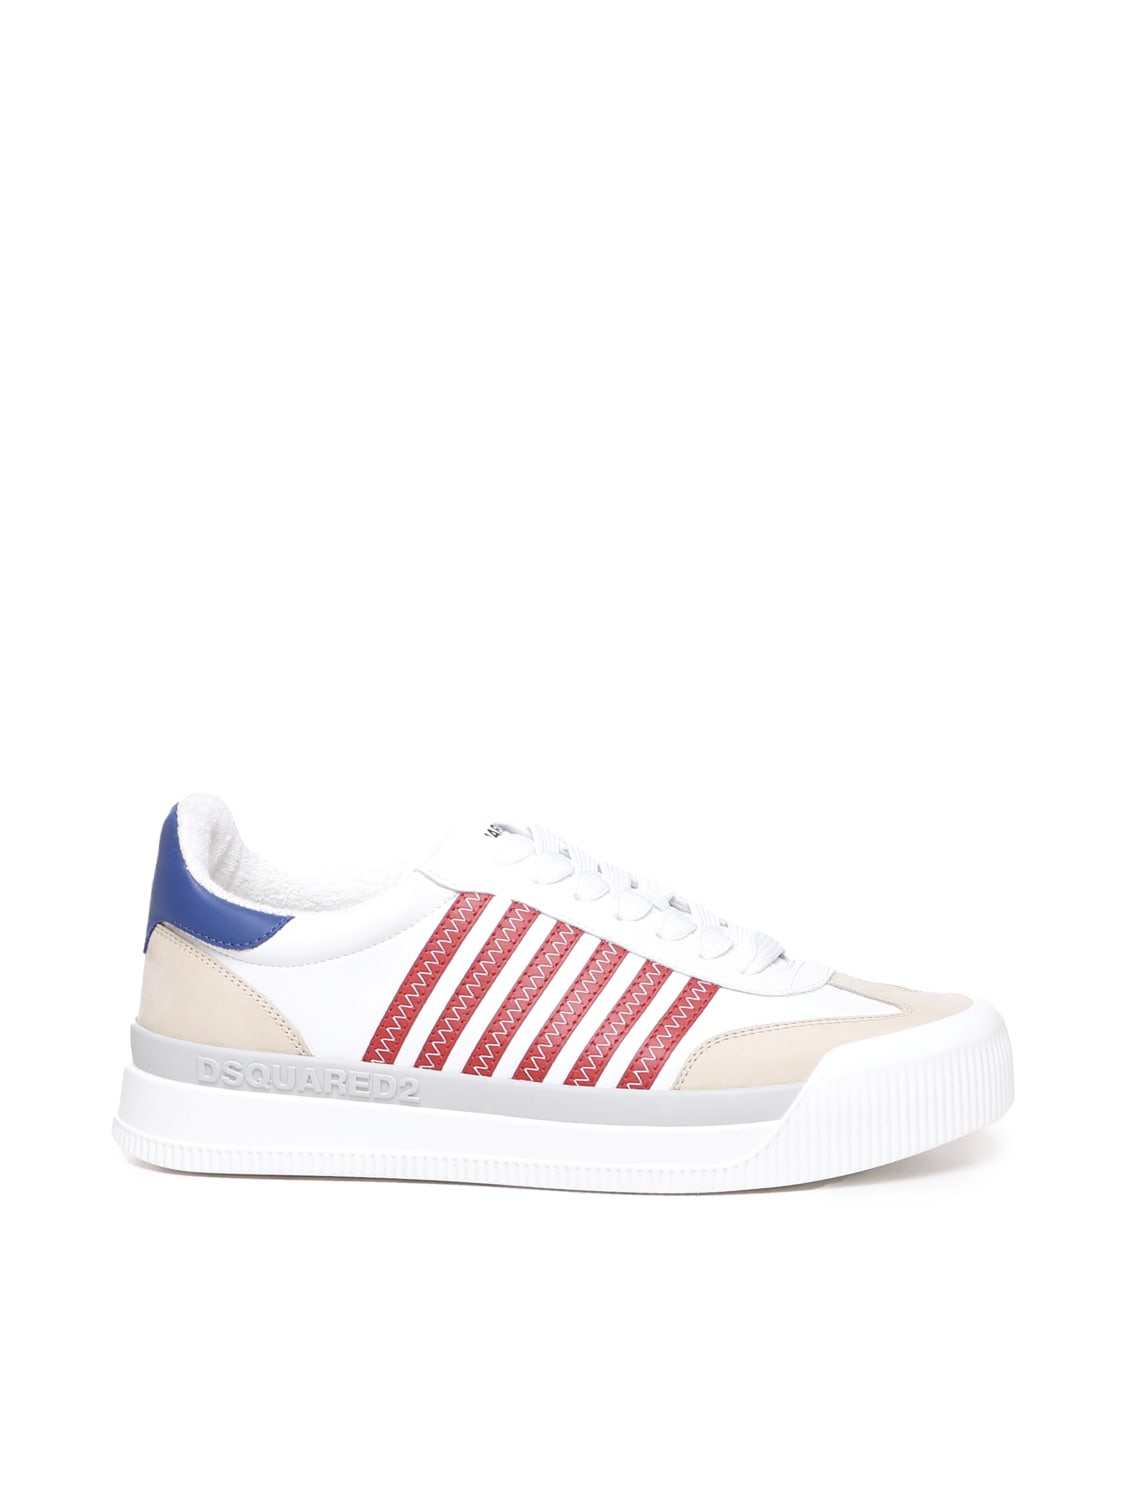 Dsquared2 Sneakers In Calfskin In White, Red, Blue